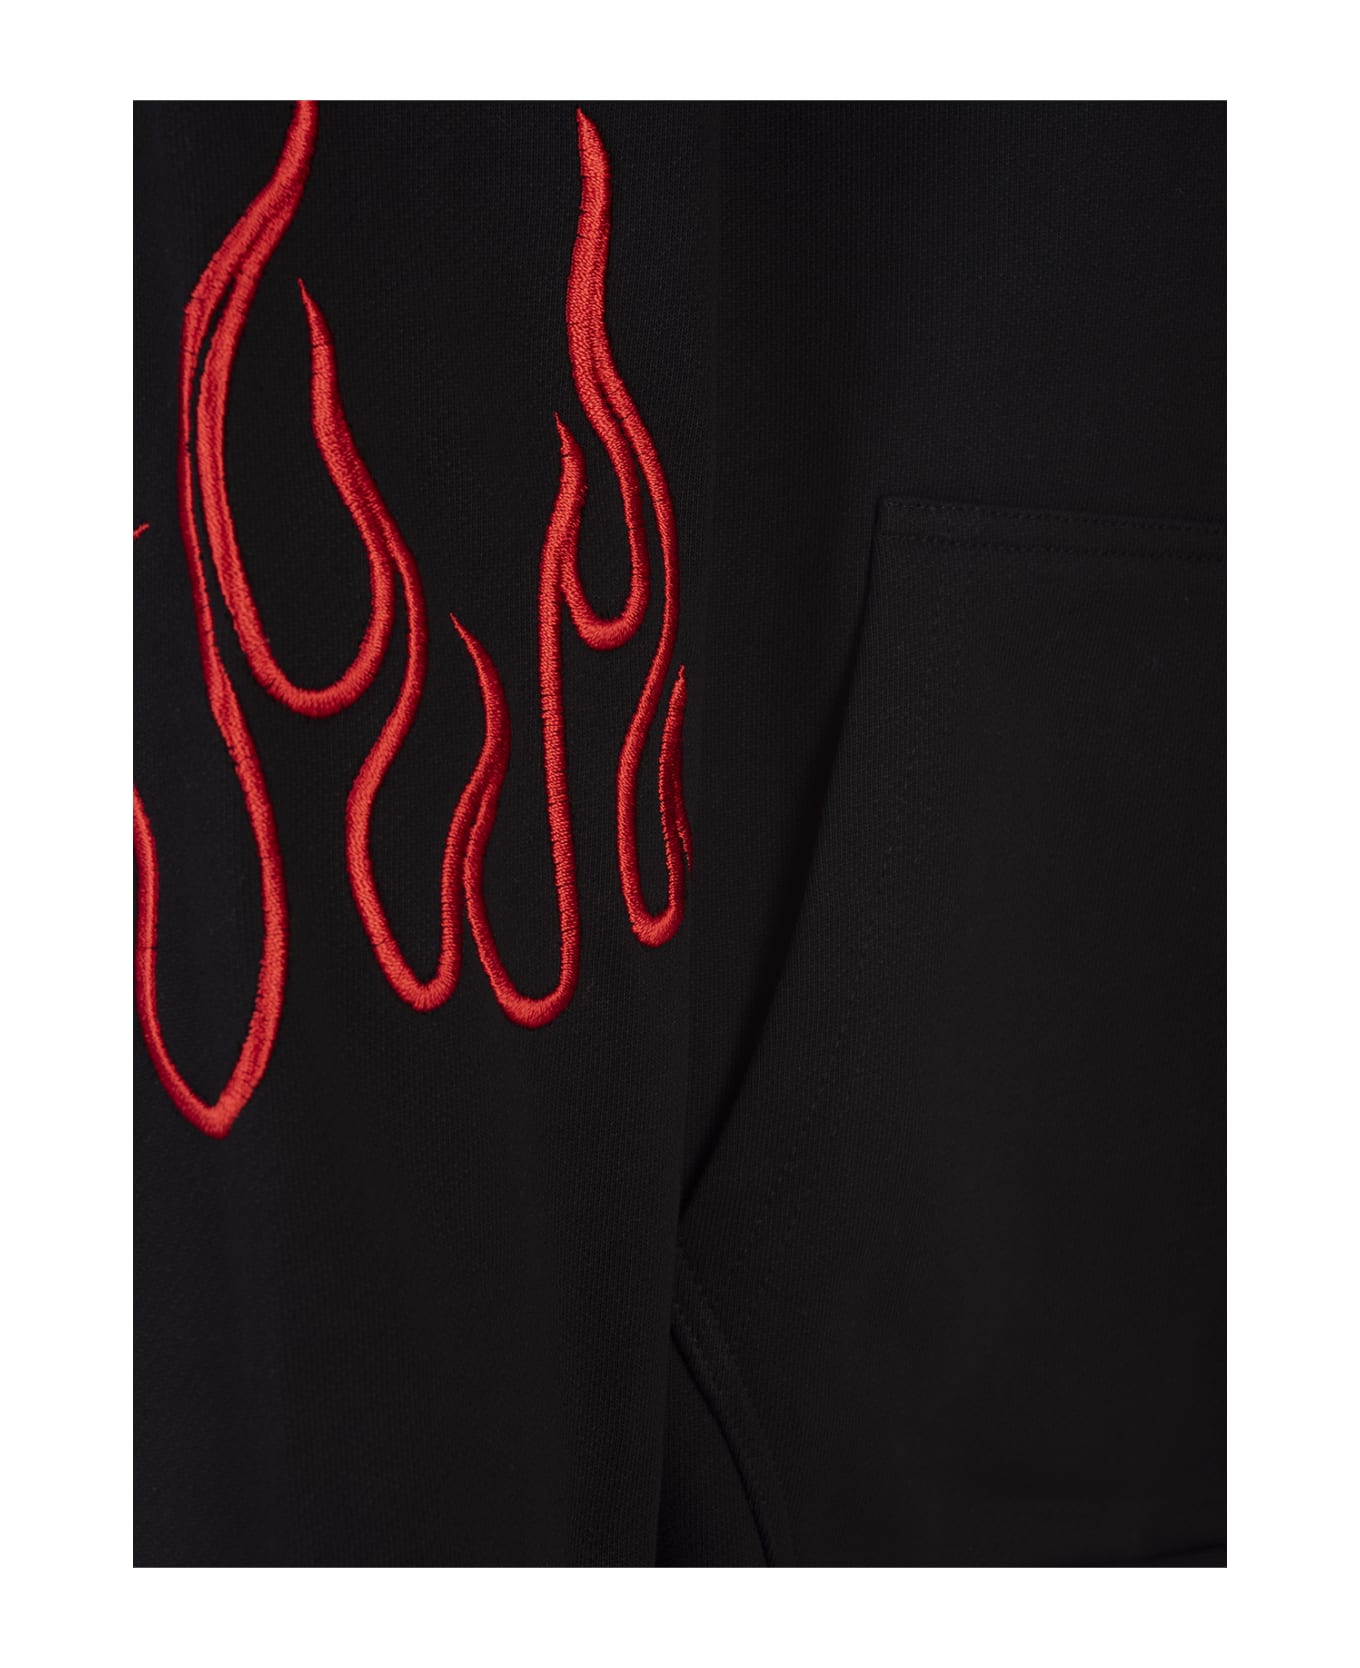 Vision of Super Black Hoodie With Red Embroidered Flames - Black